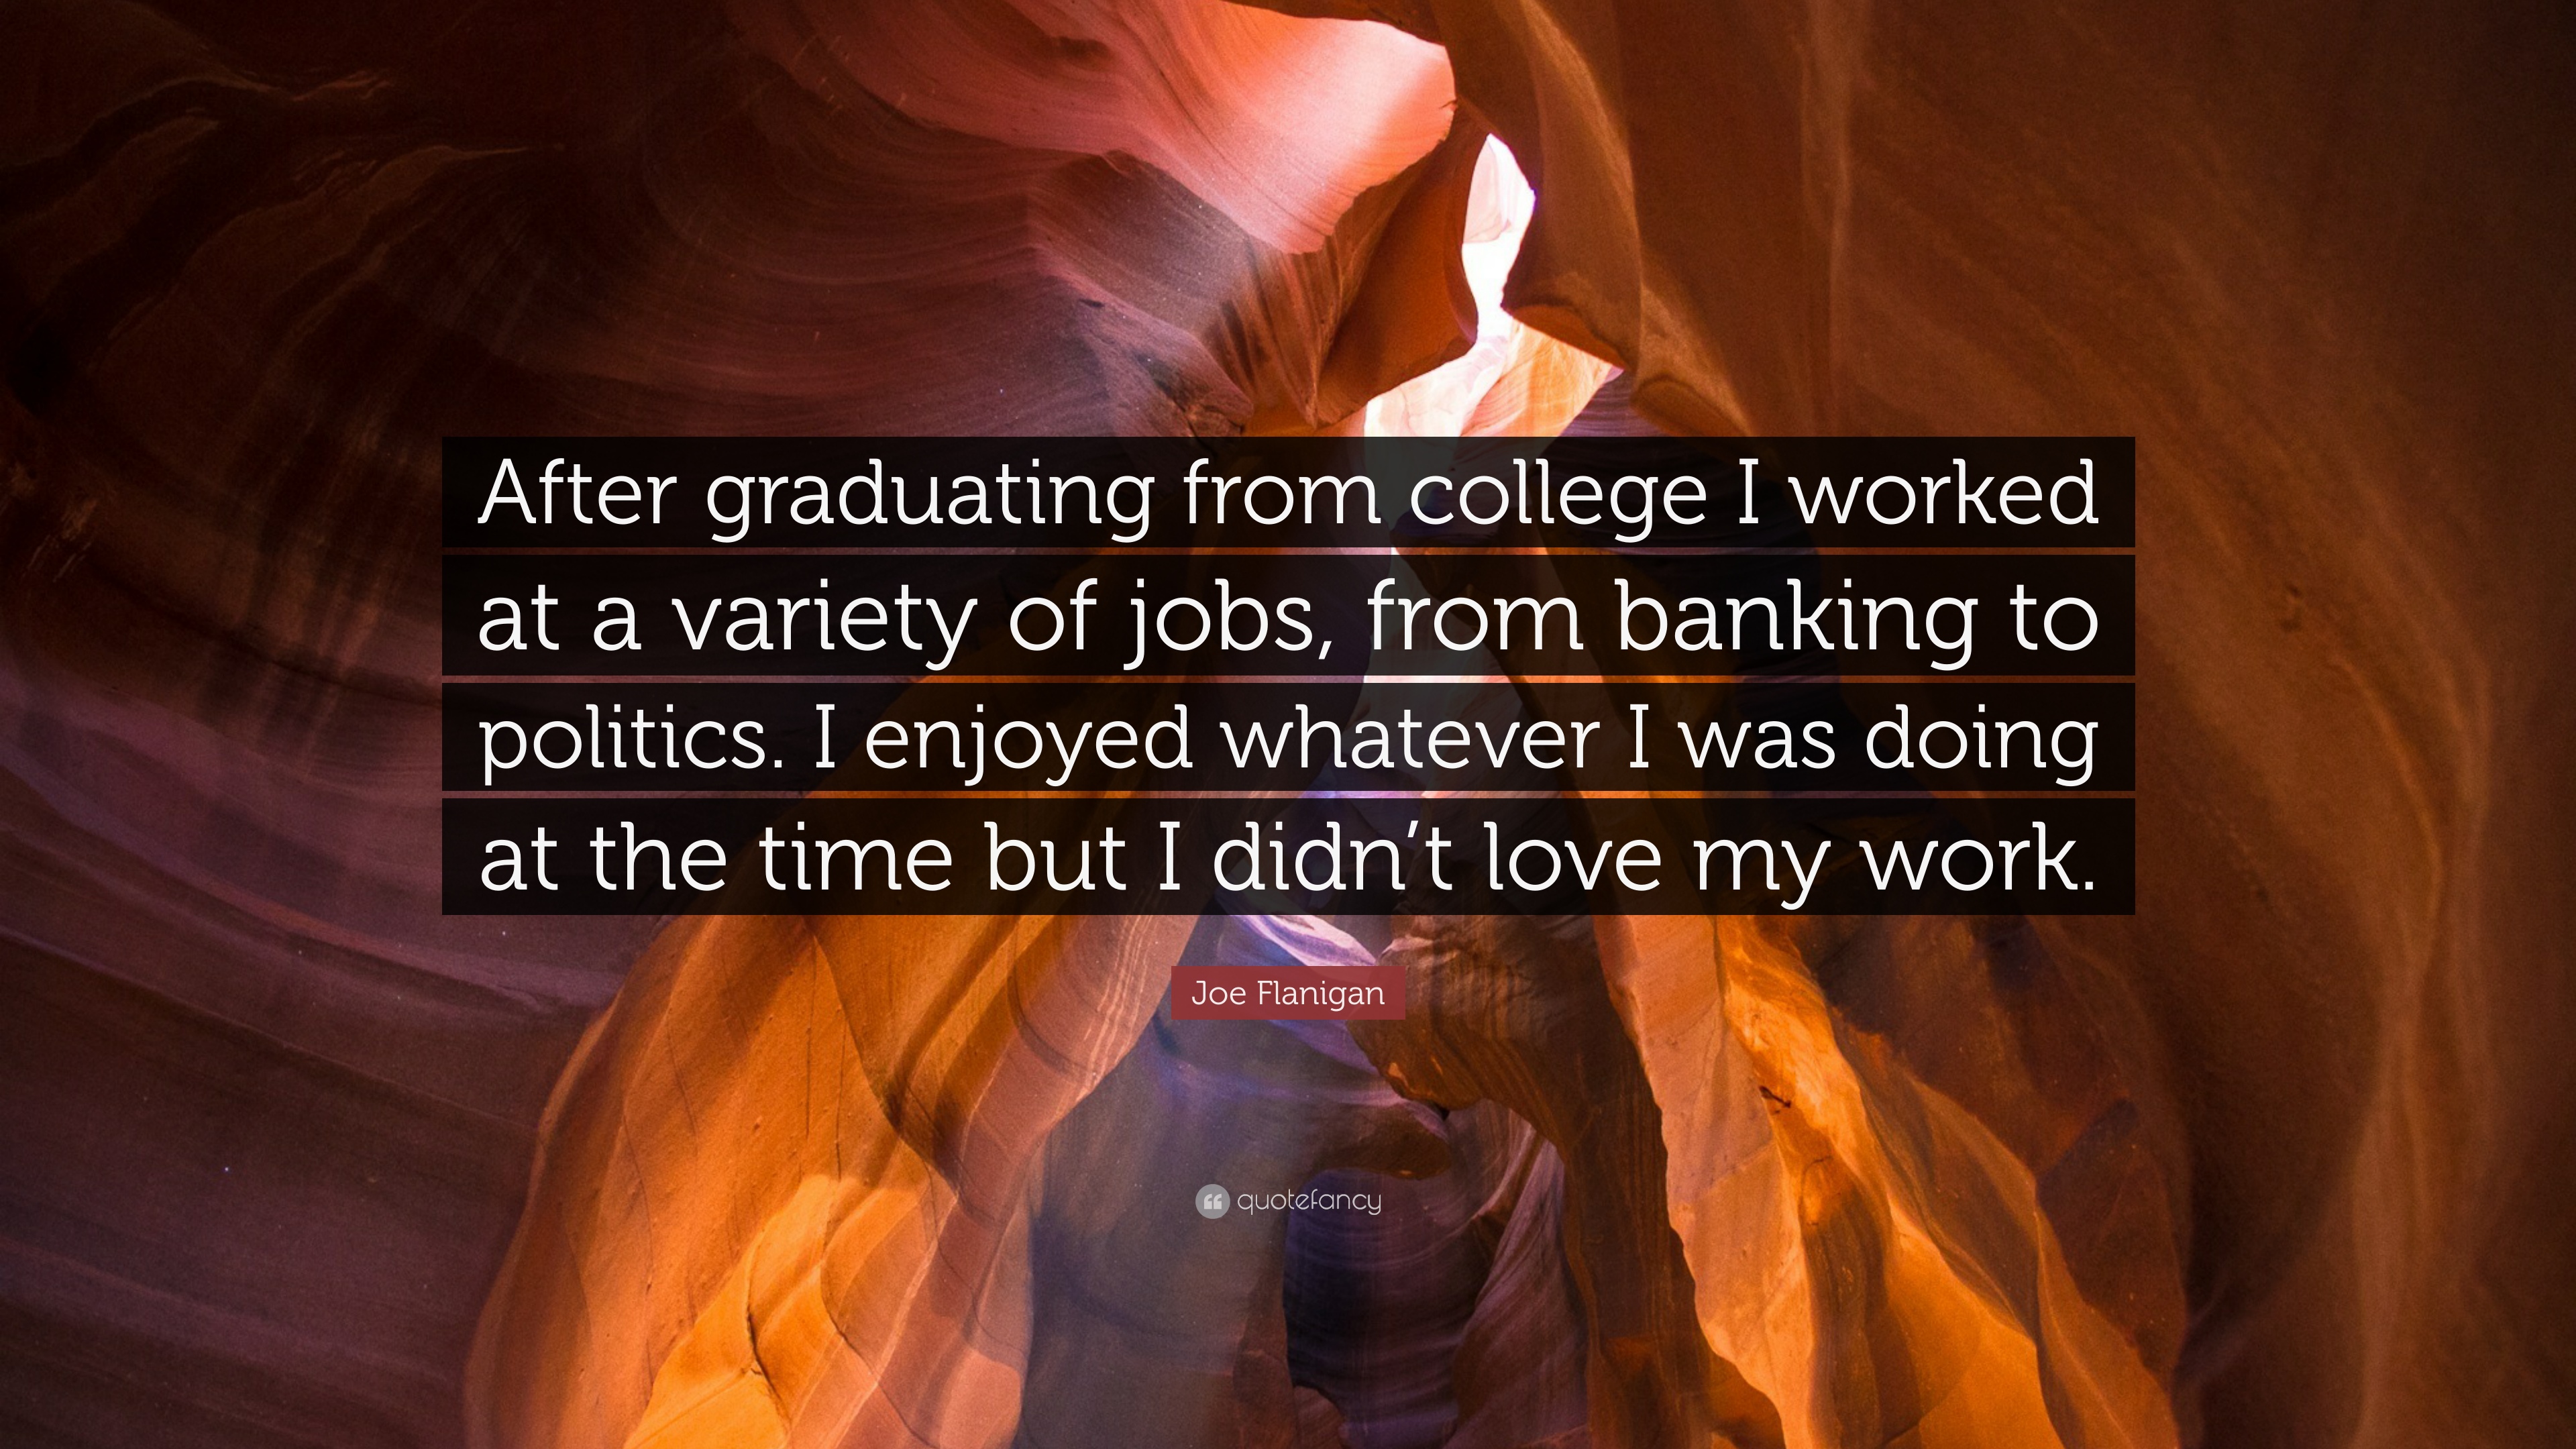 Joe Flanigan Quote: “After graduating from college I worked at a